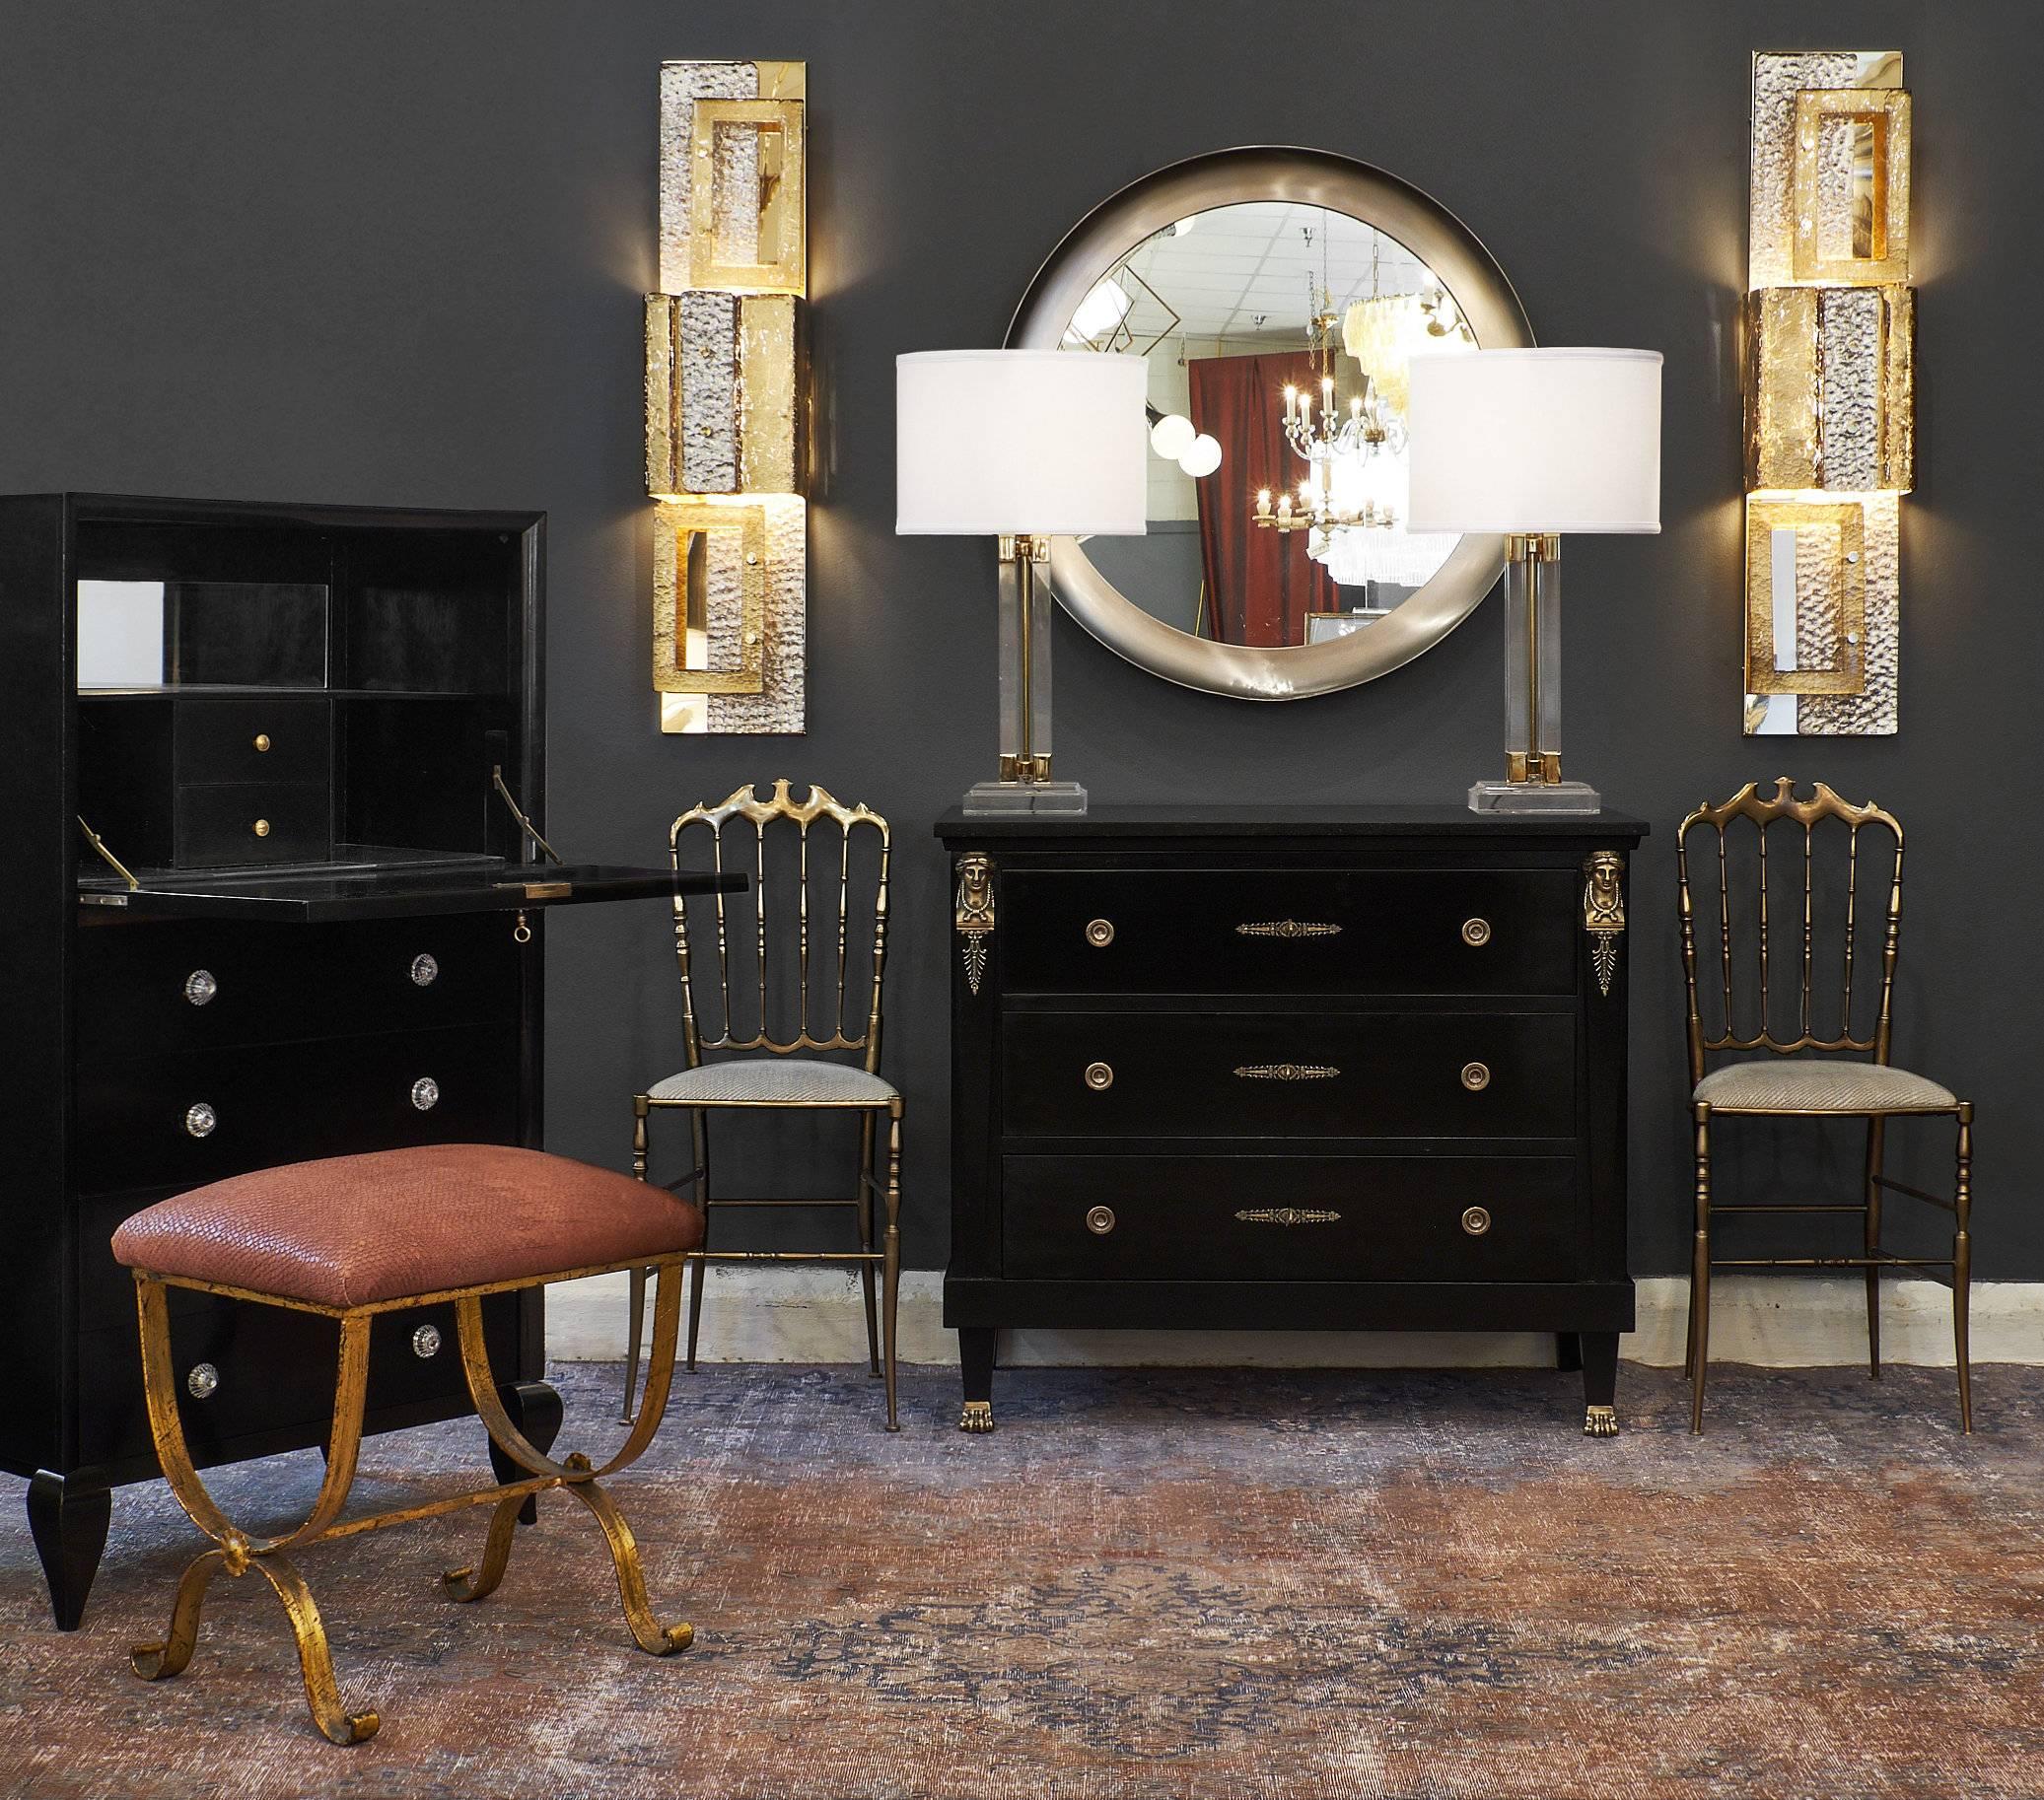 Fine French Art Deco period secretary or vanity in the manner of André Arbus, with four dovetailed drawers, drop front, mirrored interior, and ebonized lustrous French polish. We loved the iconic legs and the overall line and size of this beautiful